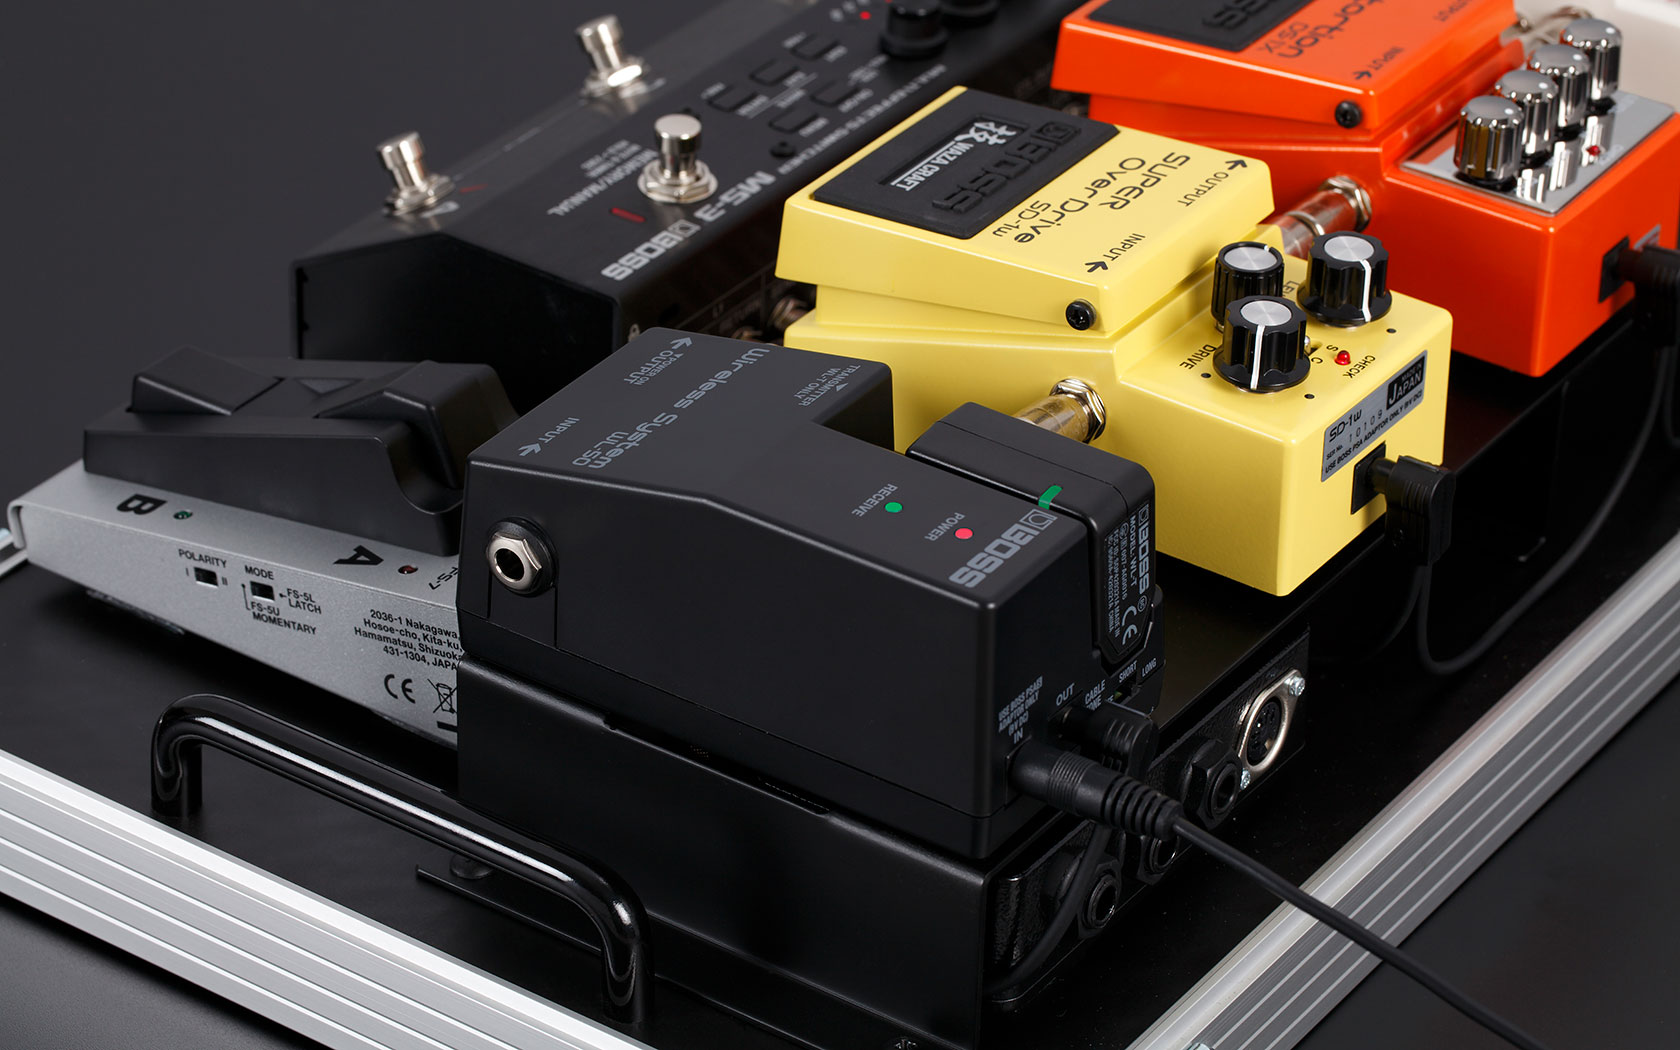 Boss Wl-50 Wireless Guitar System Integration Pedalboard - Wireless microphone for instrument - Variation 4